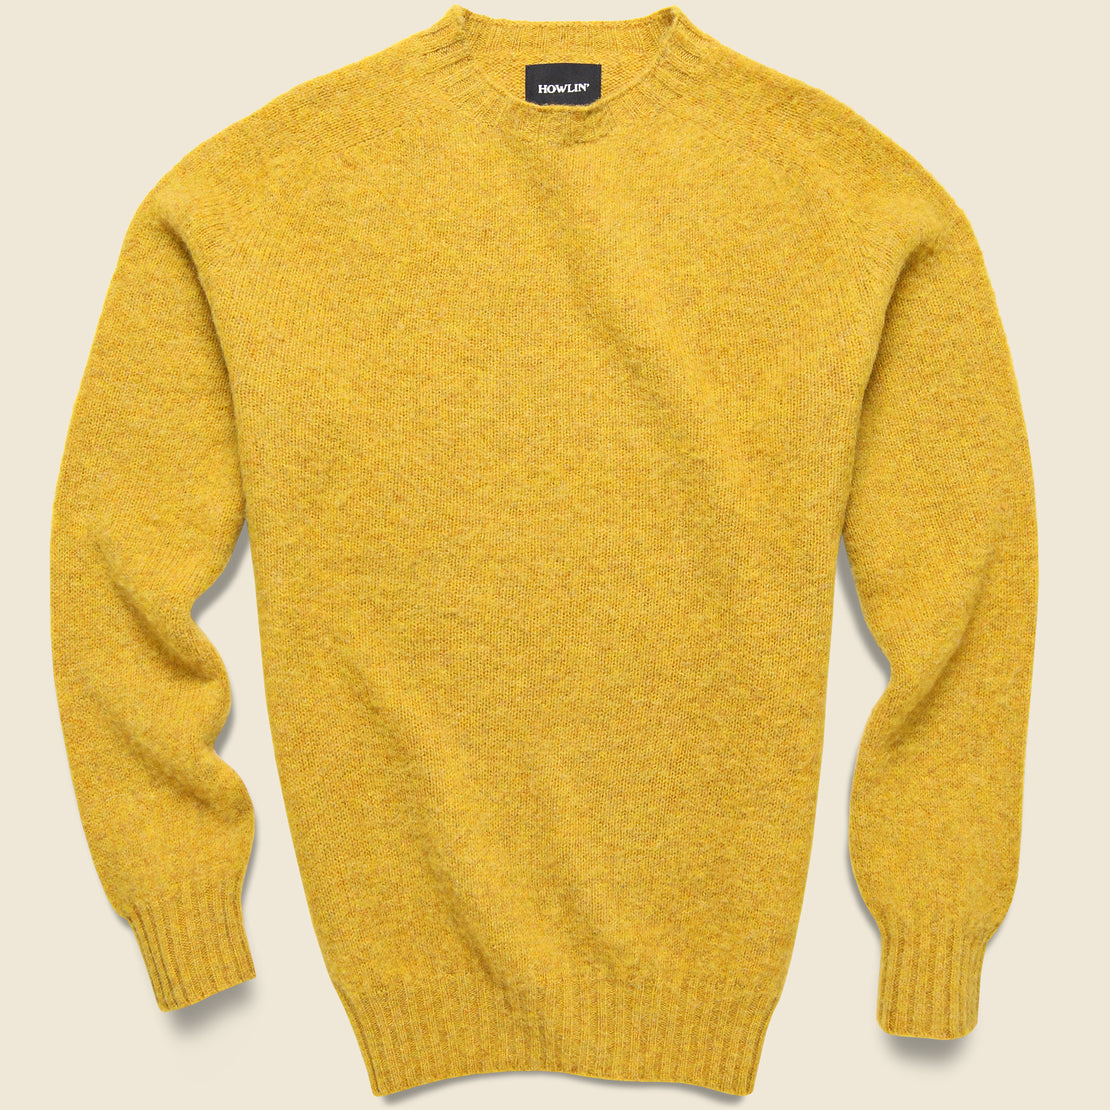 Howlin Birth of the Cool Sweater - Butterscotch